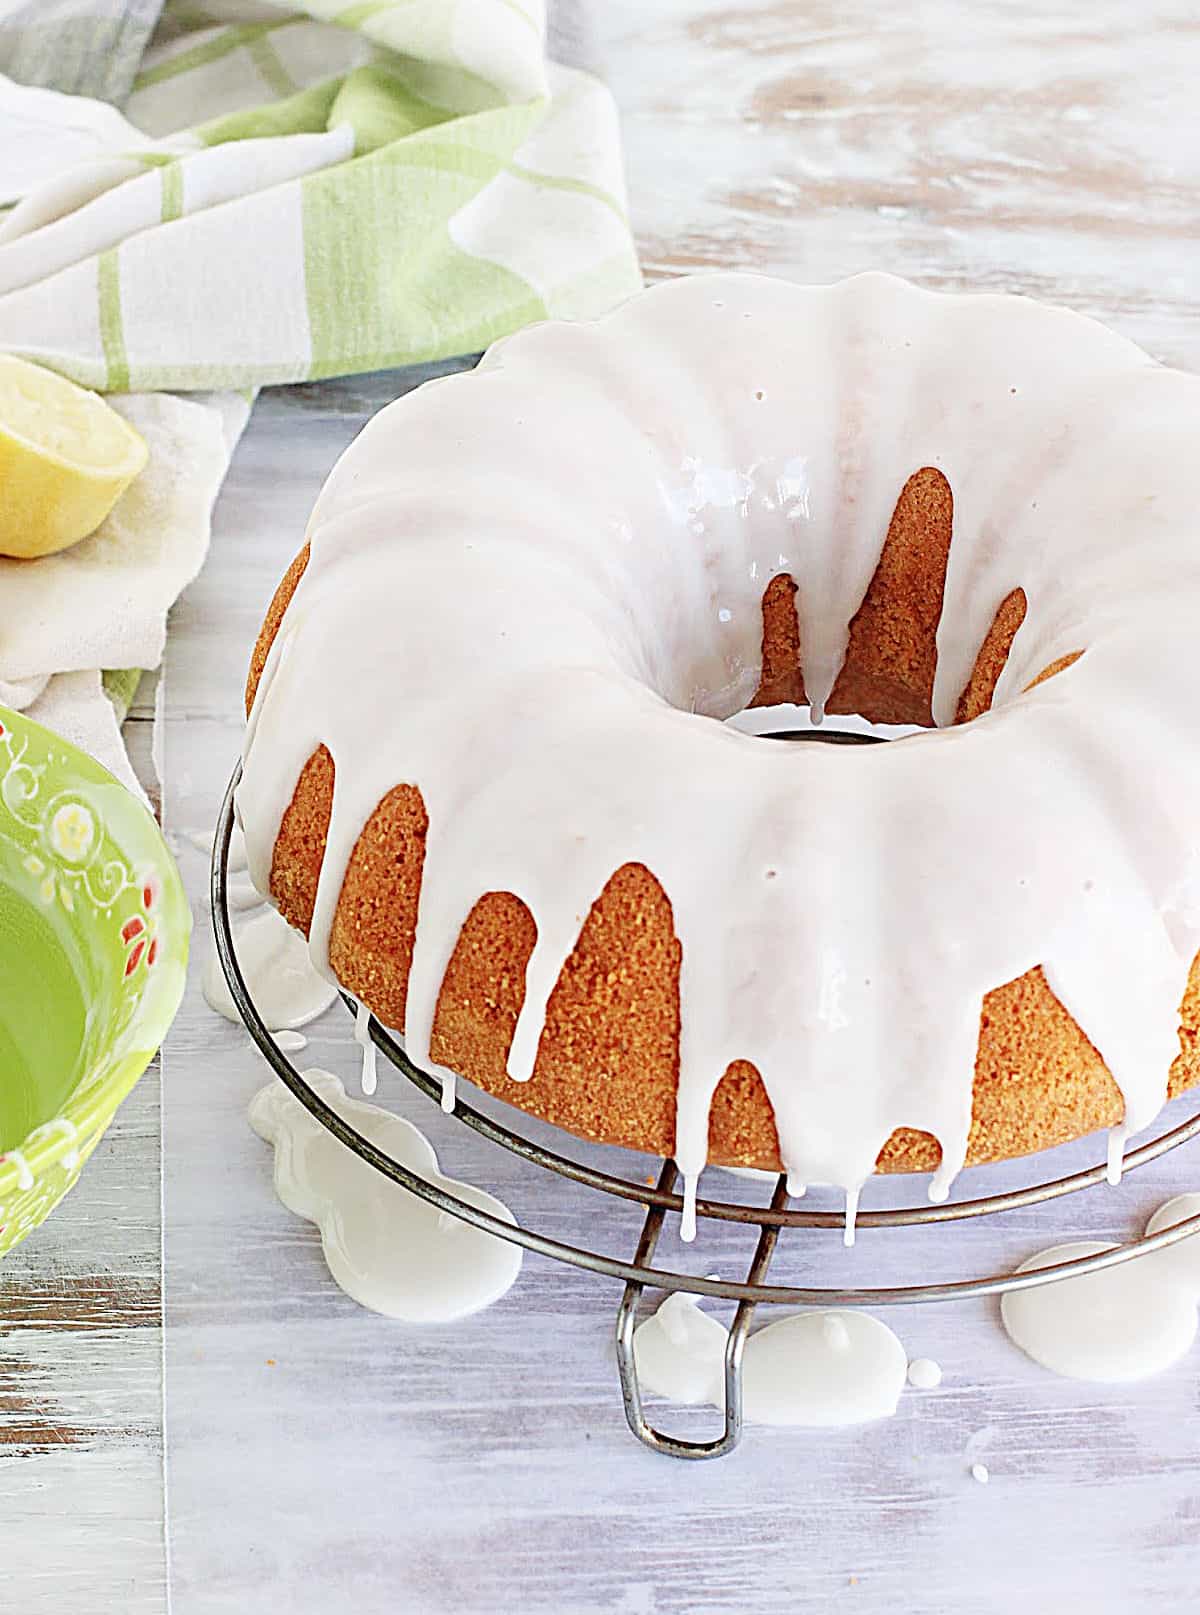 Glazed bundt cake on wire rack on white table, green white cloth and bowl